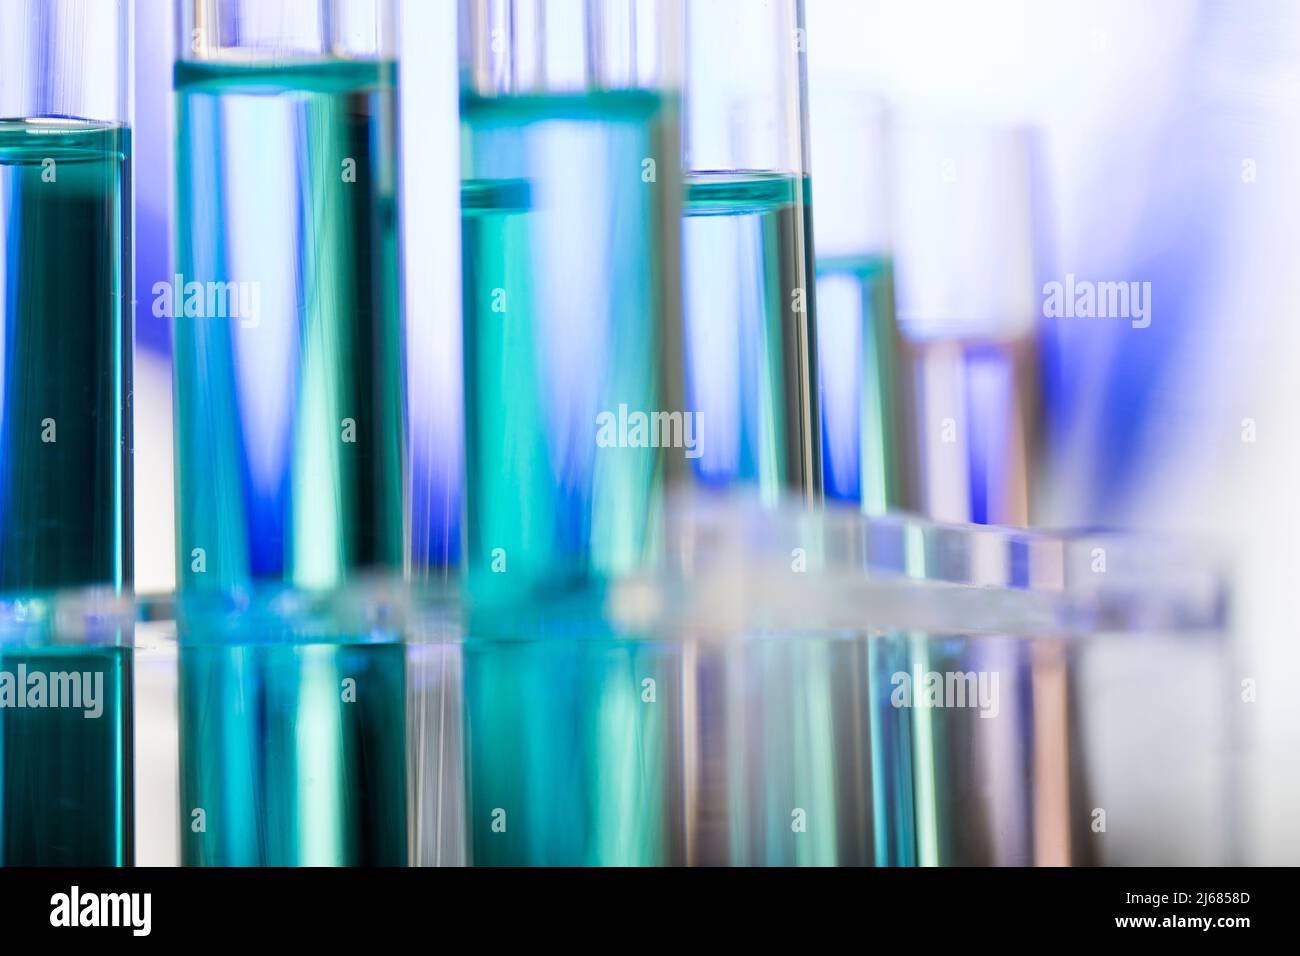 Neatly arranged test tubes containing blue reagent in chemistry laboratory - stock photo Stock Photo